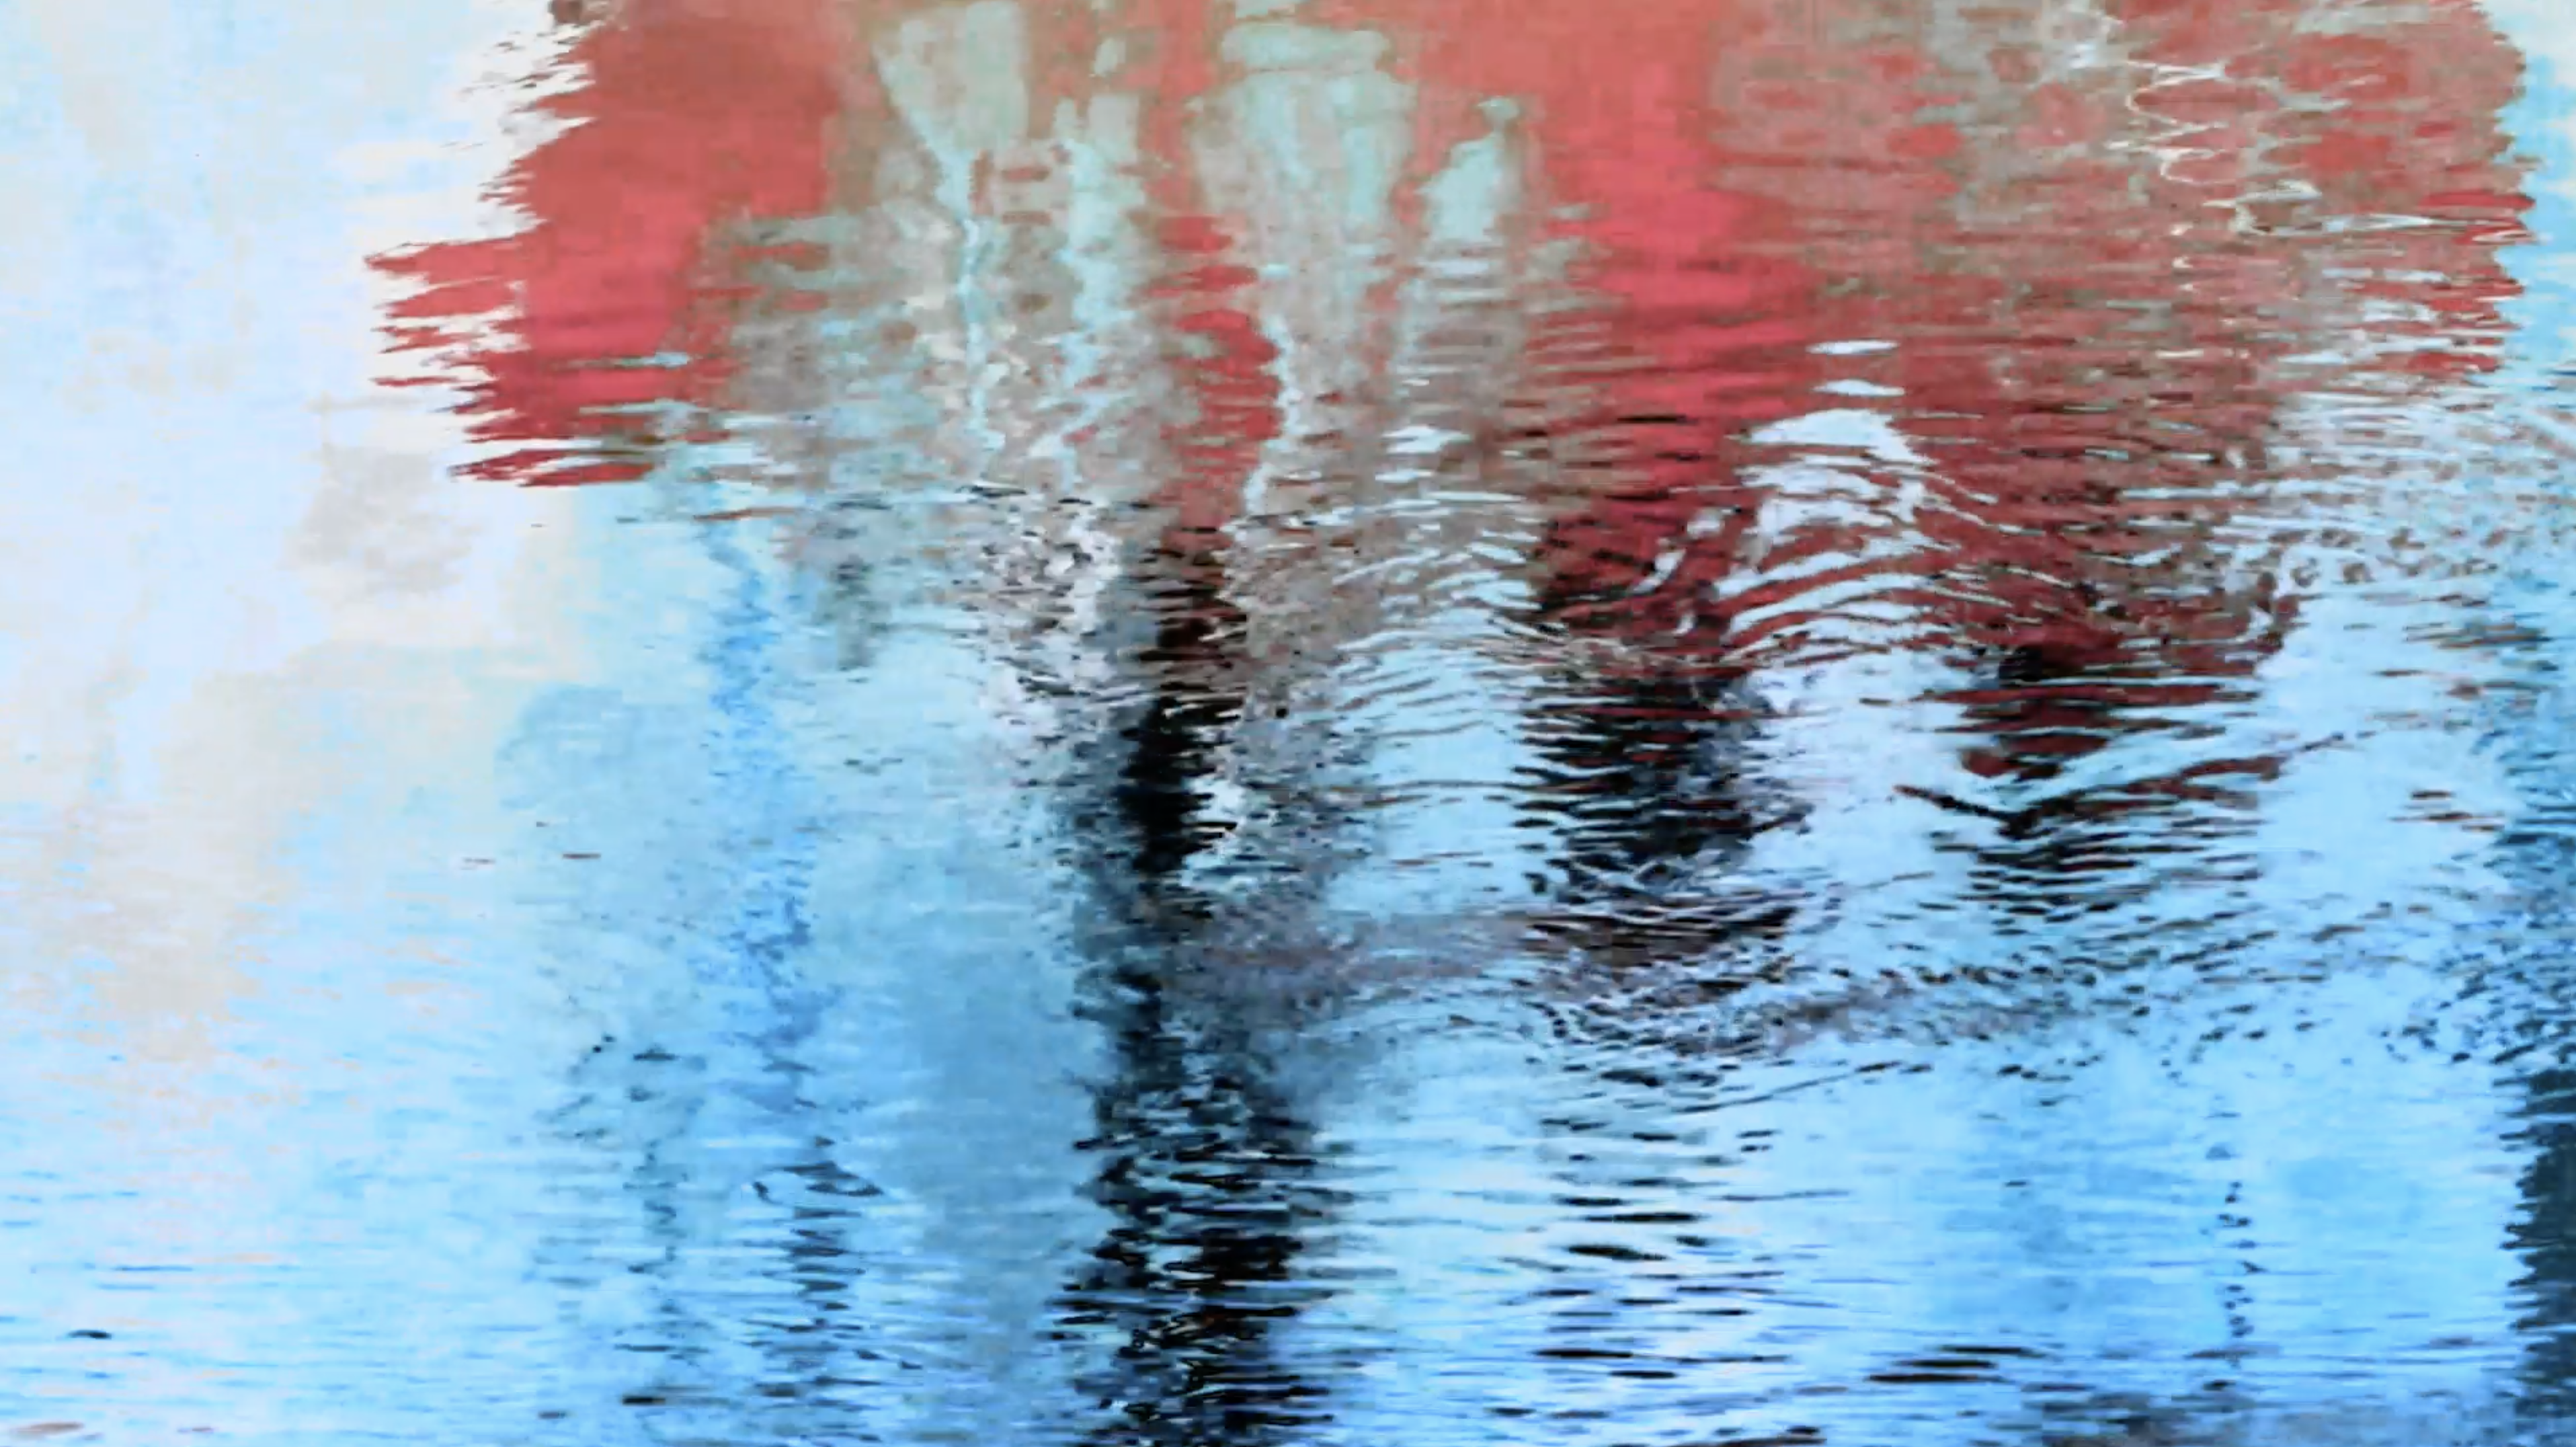 Still image from a work of visual poetry featuring a reflection in water.